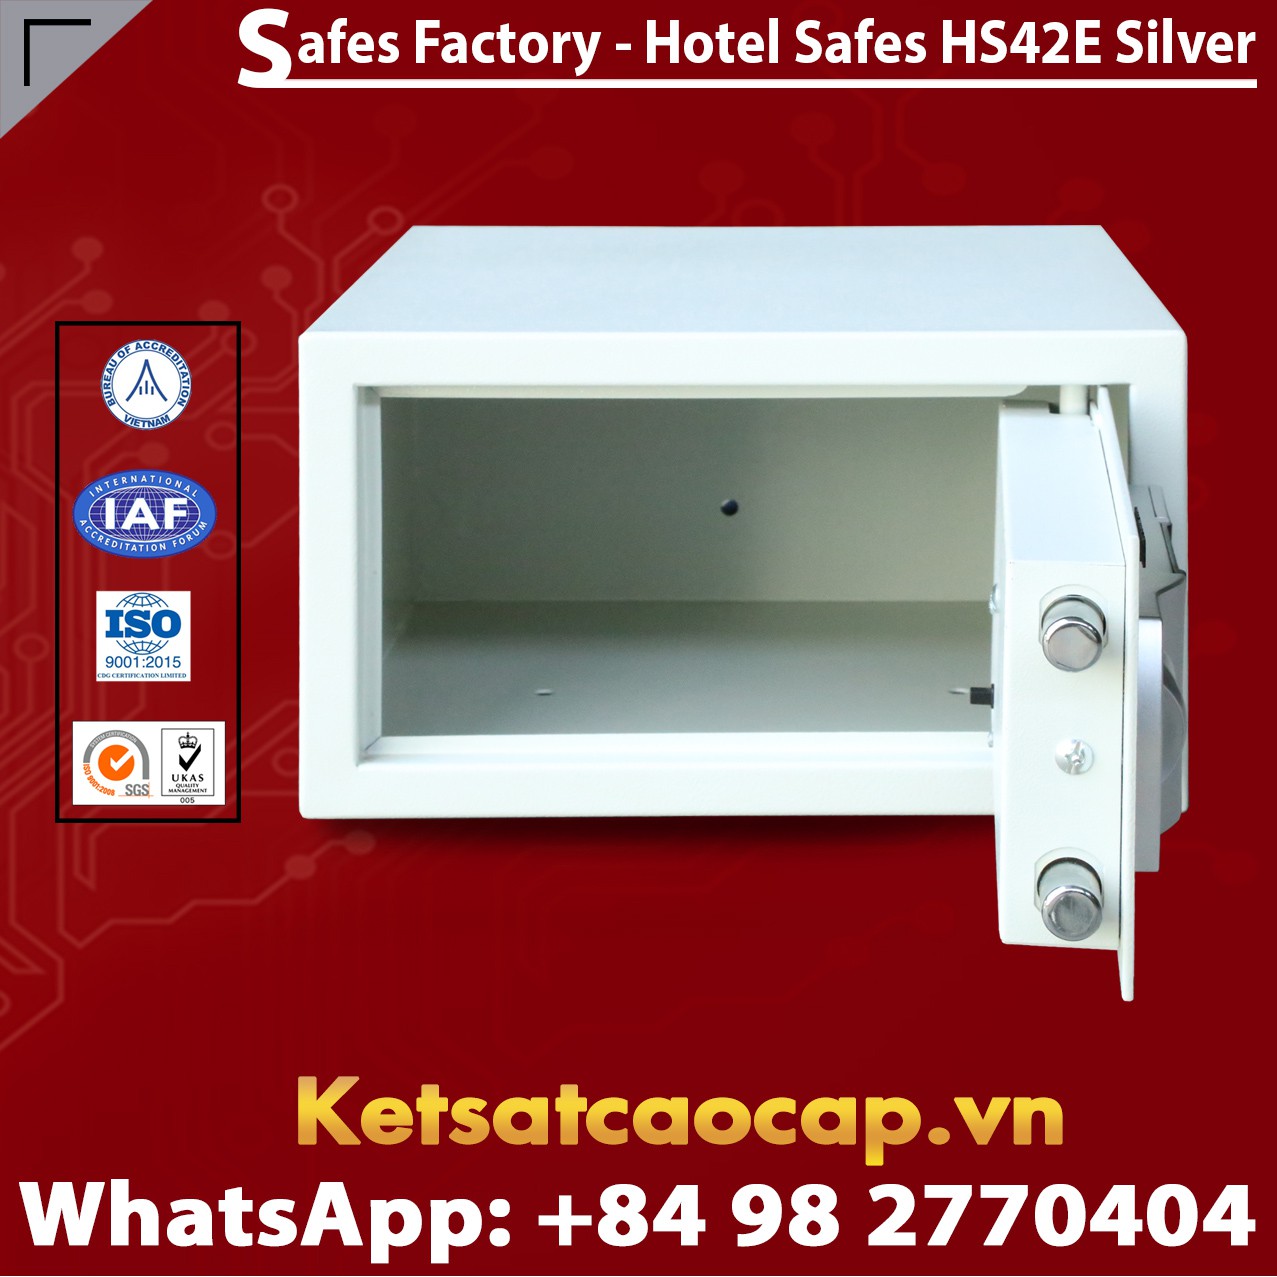 Buy Best Sellers In Hotel Safes Manufacturers & Suppliers‎ in Australia Online